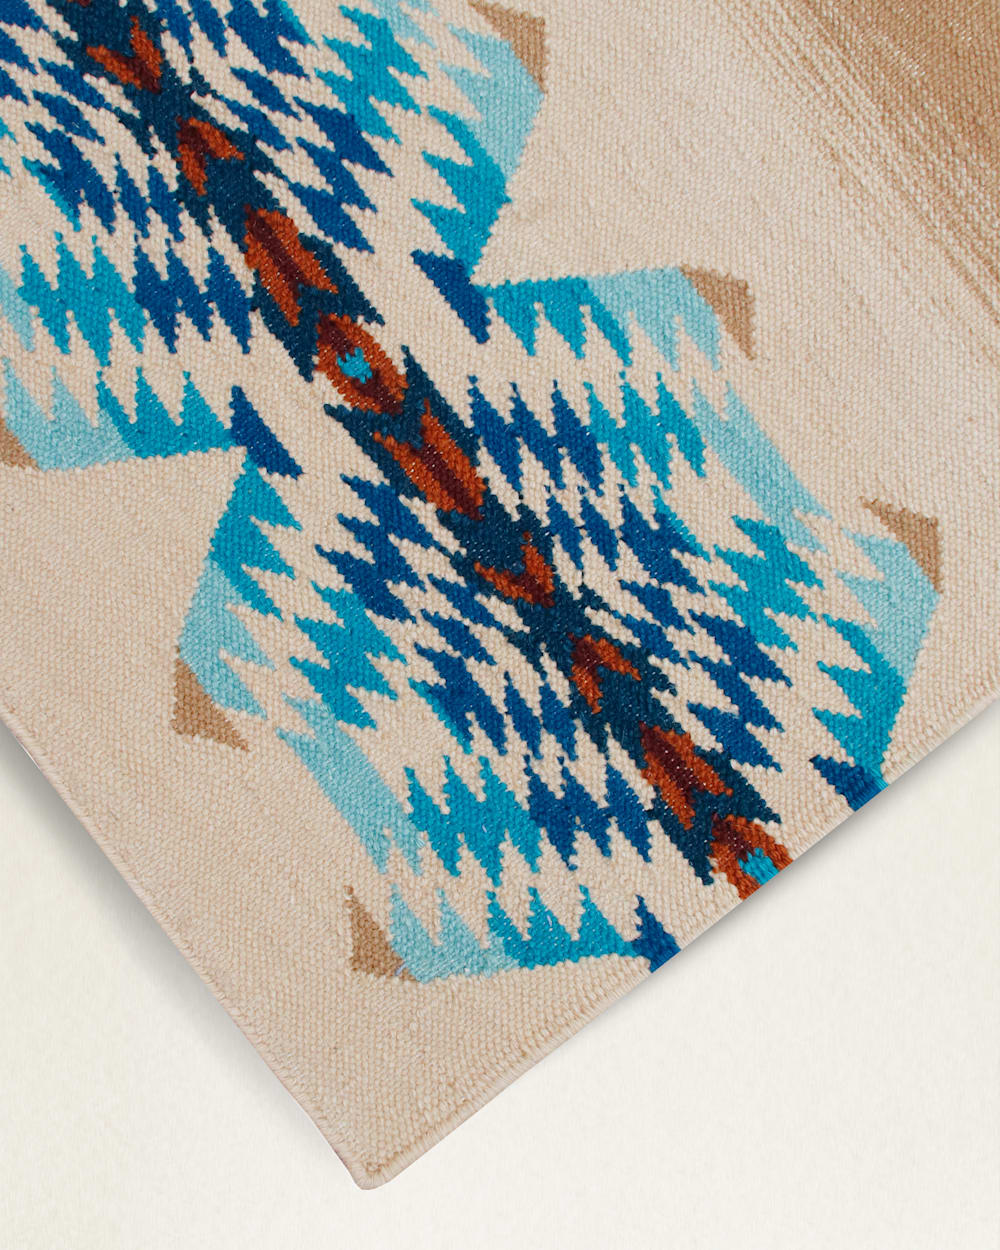 ALTERNATE VIEW OF PAGOSA SPRINGS RUG IN RUST/TURQUOISE image number 2